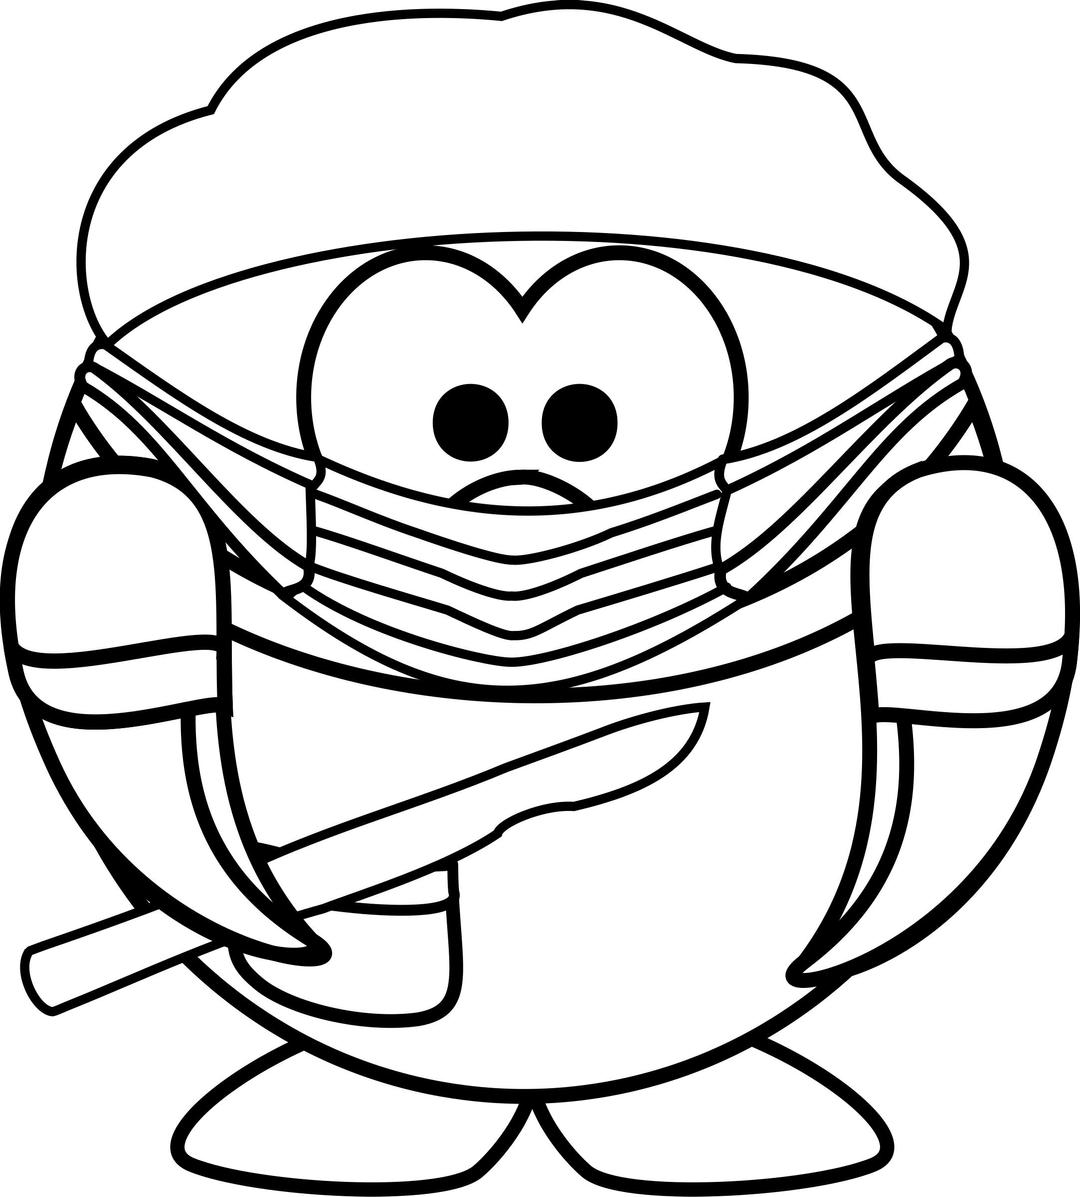 Coloring page of surgeon penguin png transparent